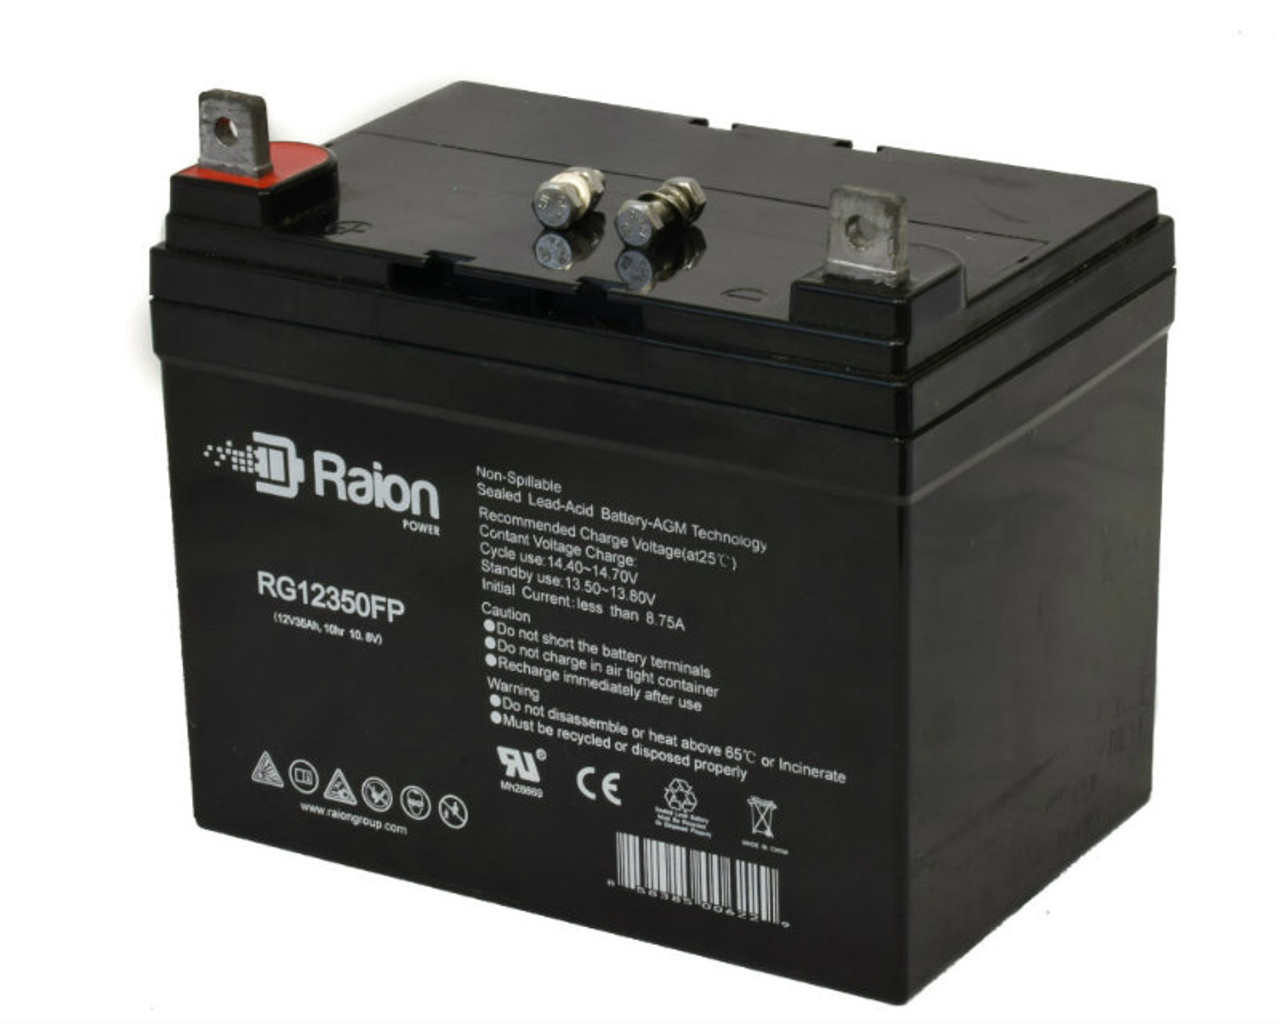 Raion Power Replacement 12V 35Ah RG12350FP Battery for Noma 18HP 43"